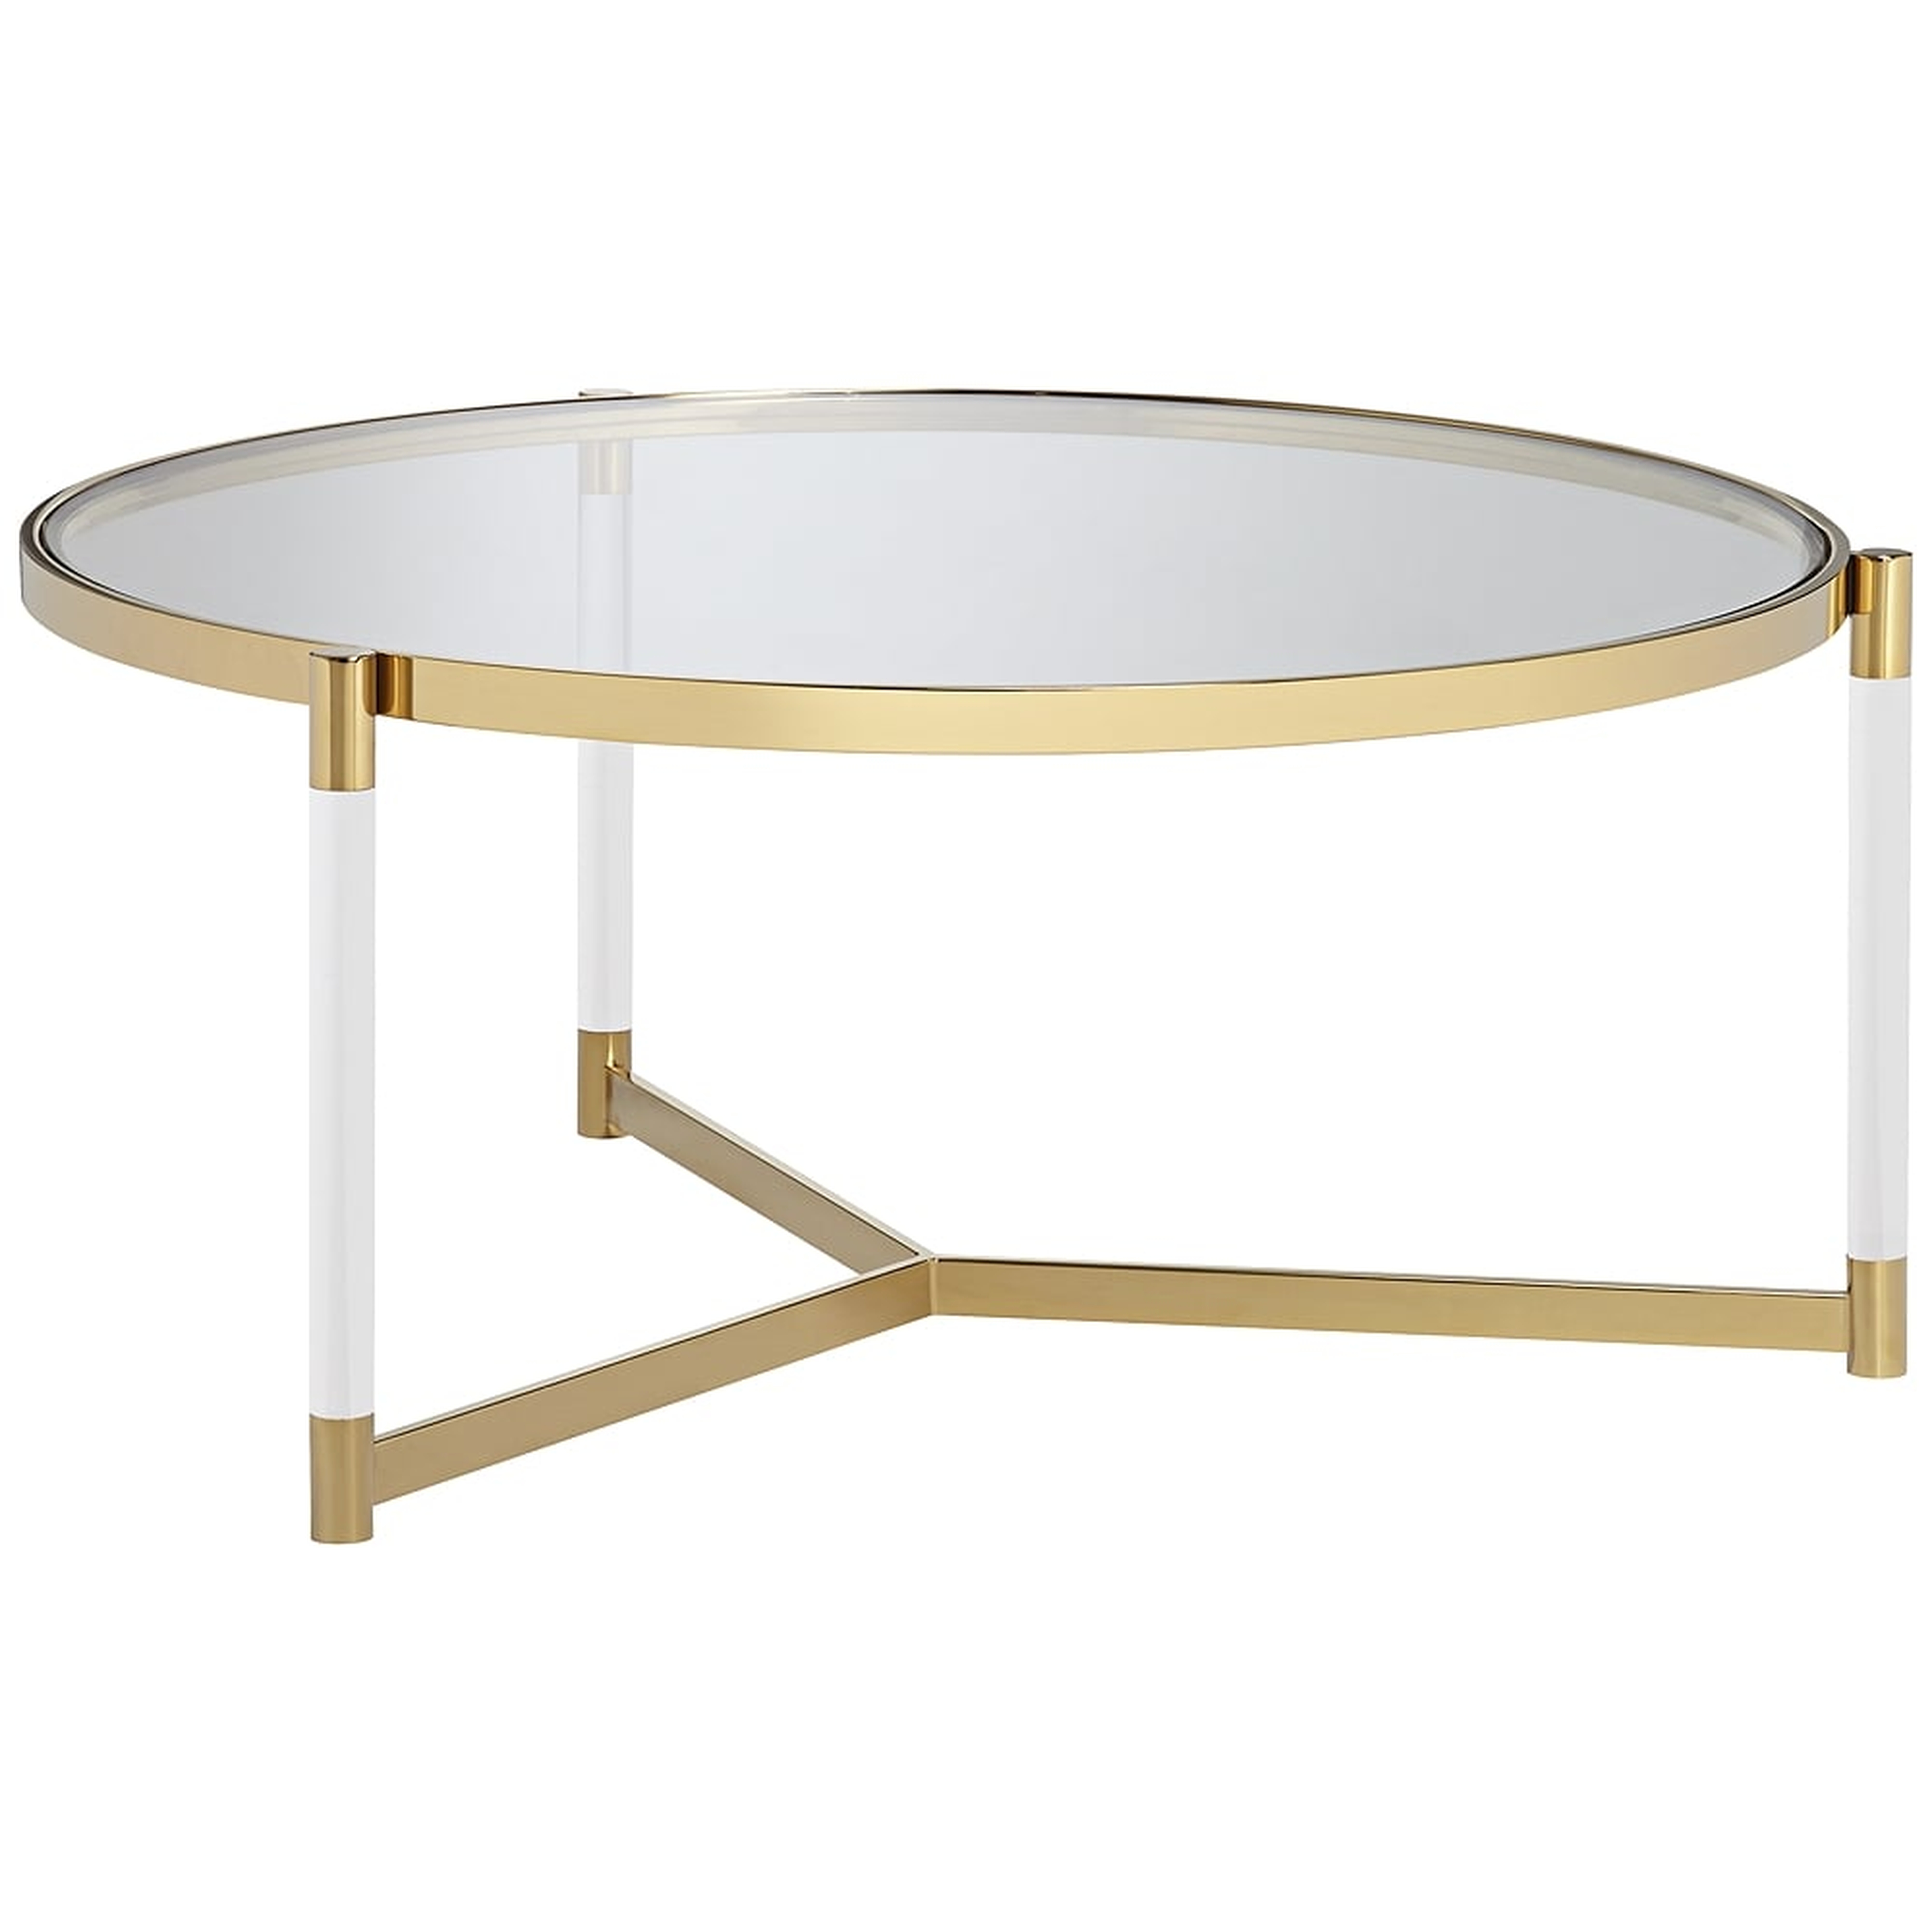 Stefania Gold and Acrylic Coffee Table - Style # 55K04 - Lamps Plus